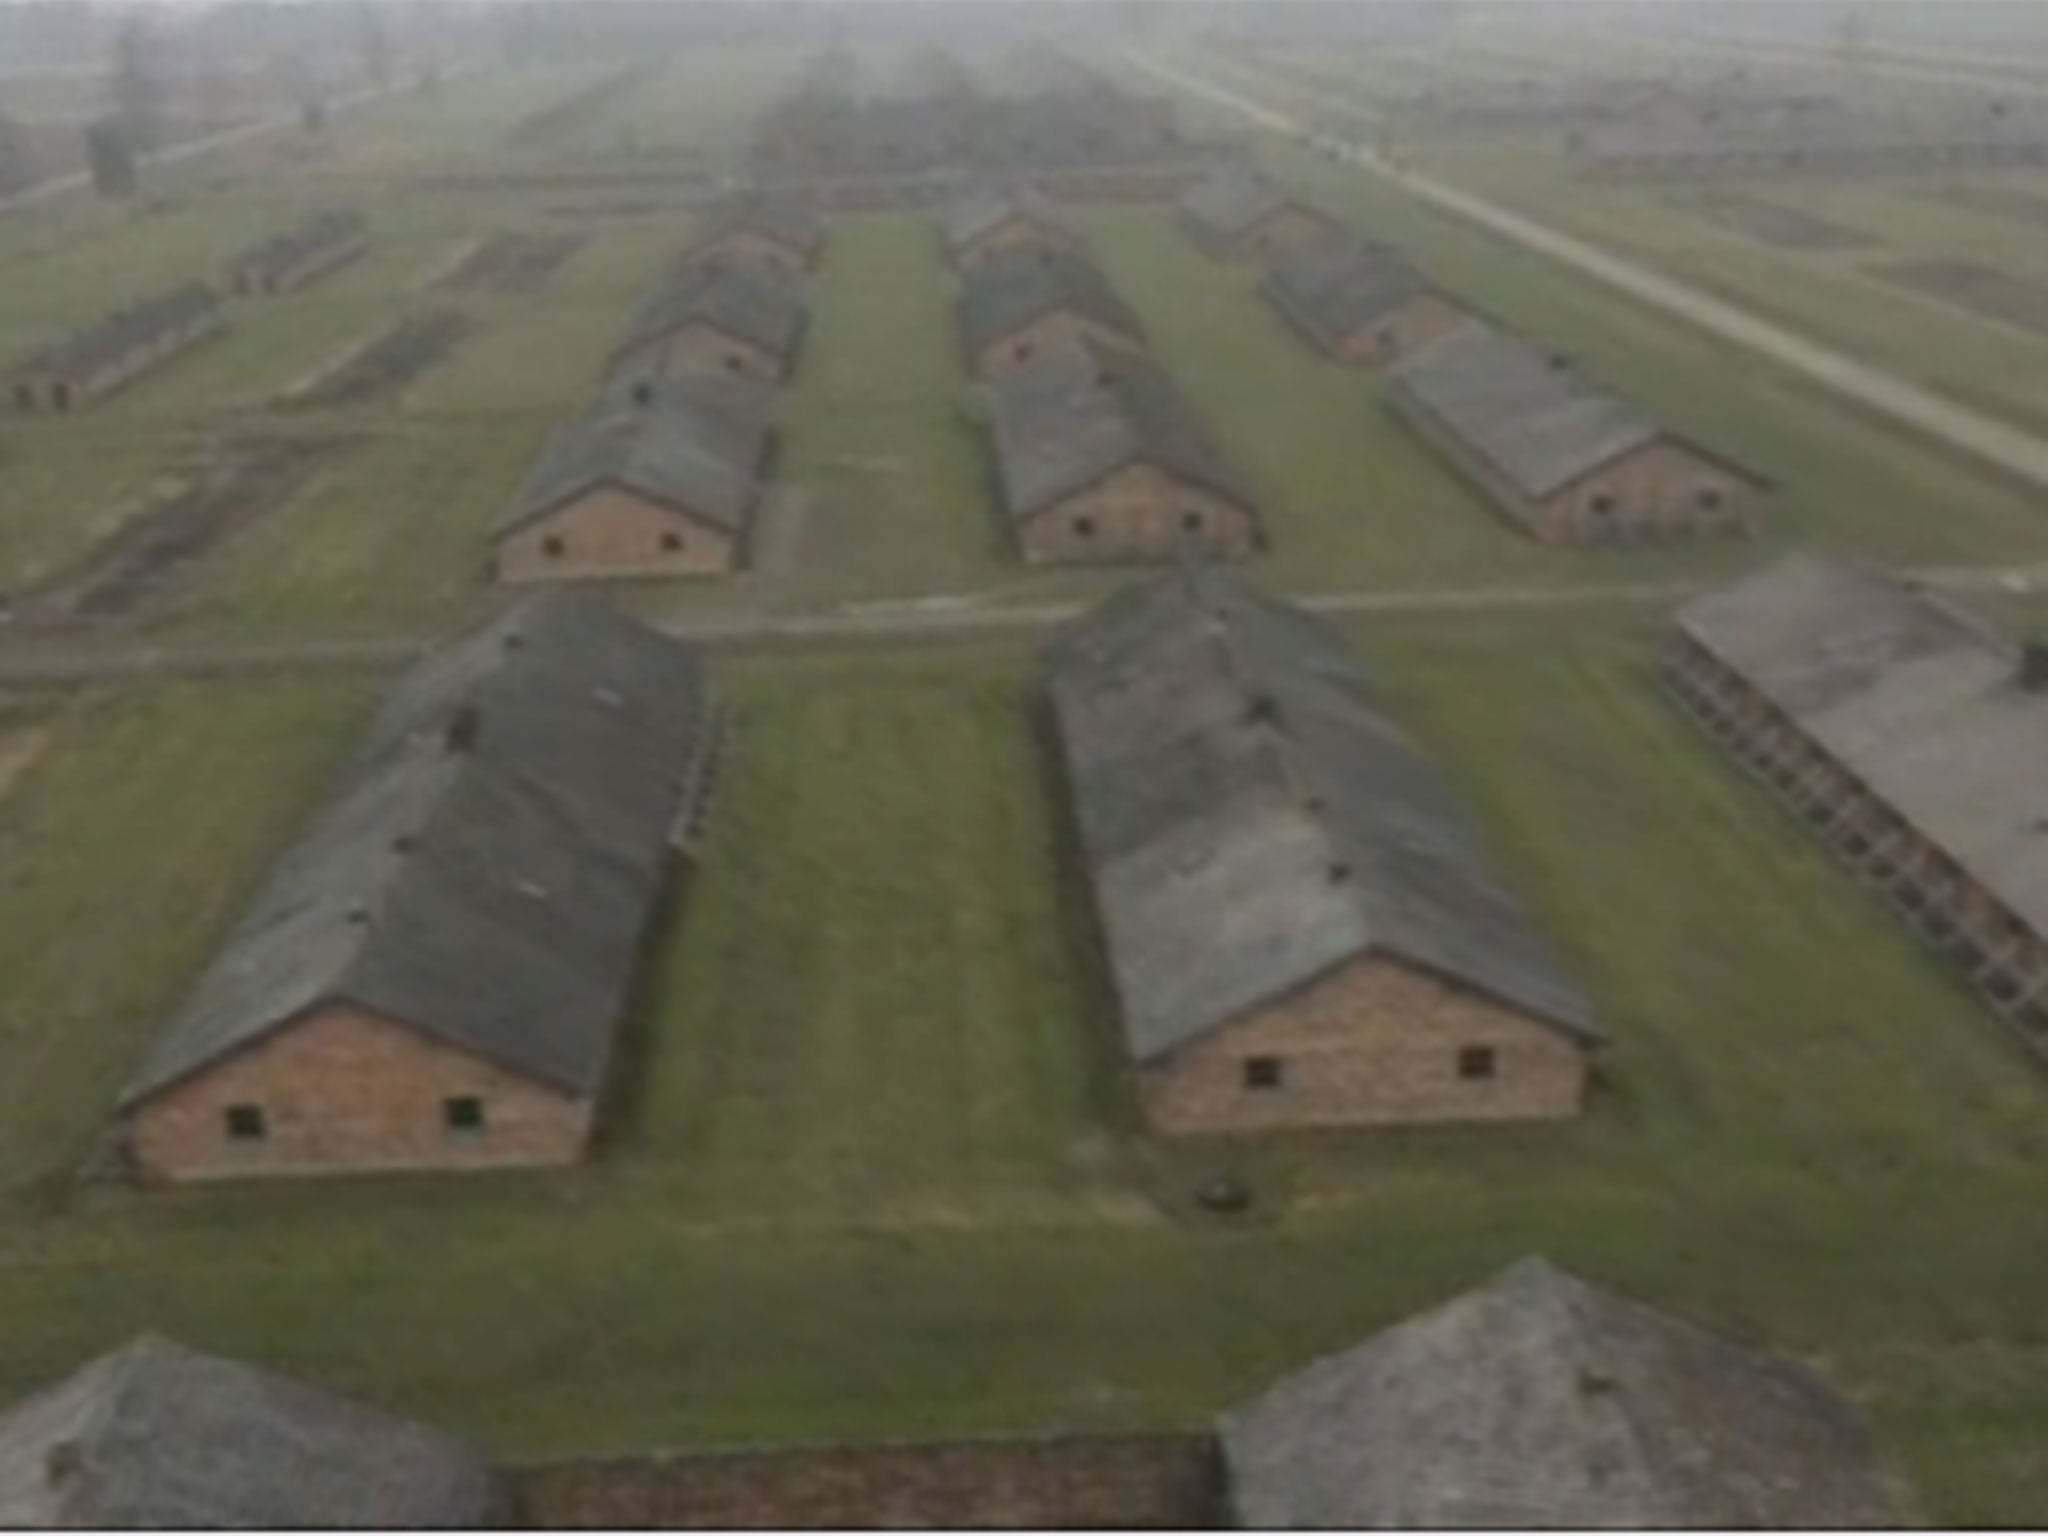 Tomorrow marks the 70th anniversary of the liberation of Auschwitz